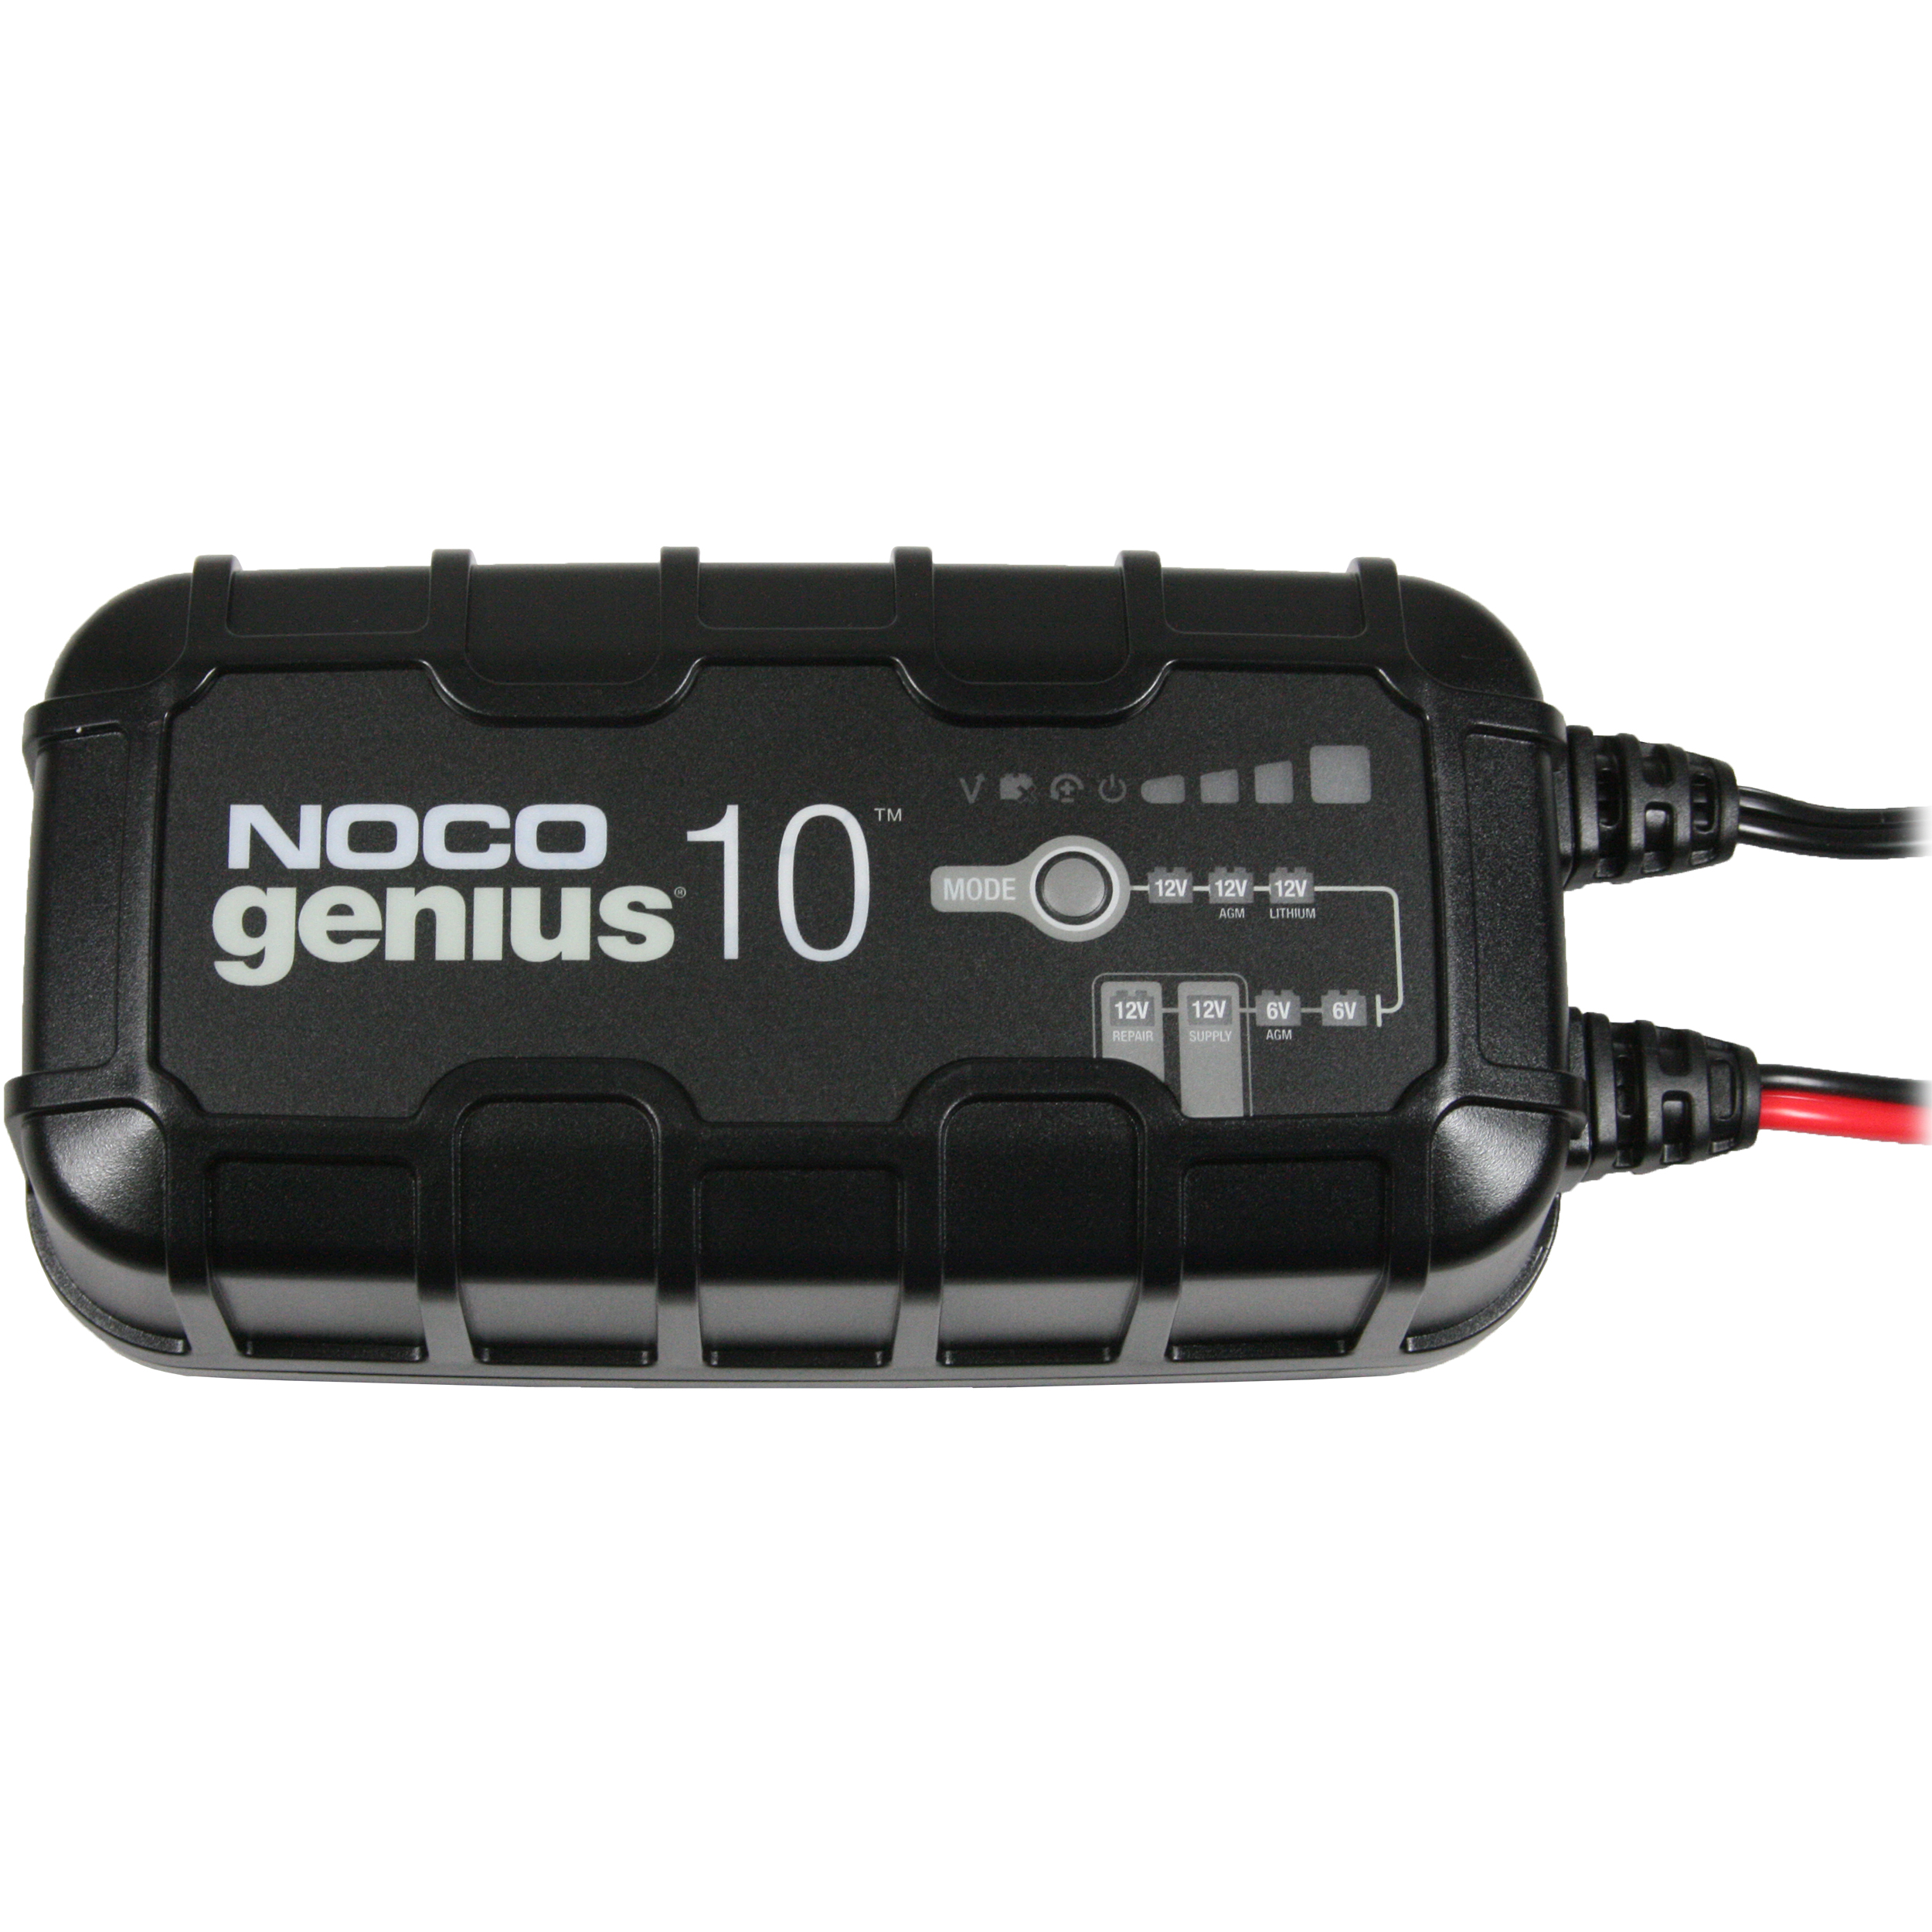 Selecting a Battery Charger